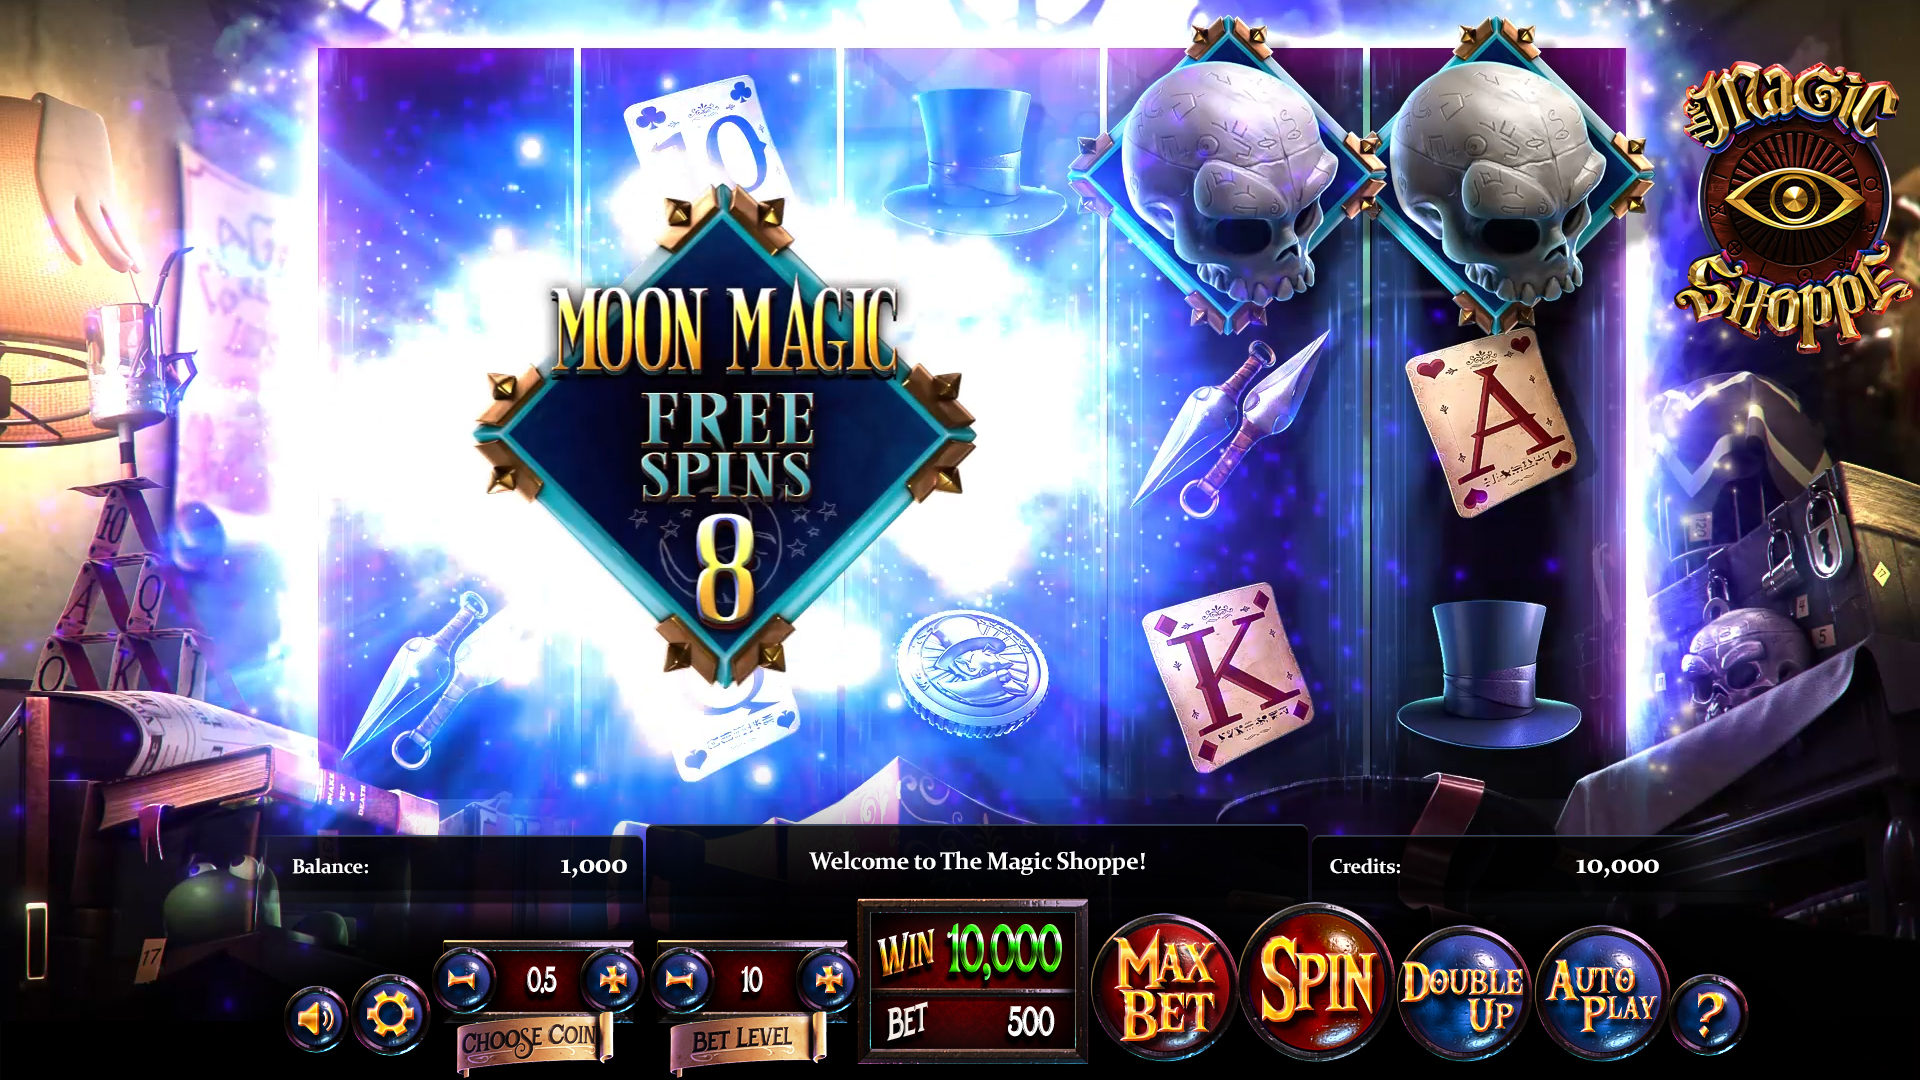 The Magic Shoppe - Sun And Moon Free Spins